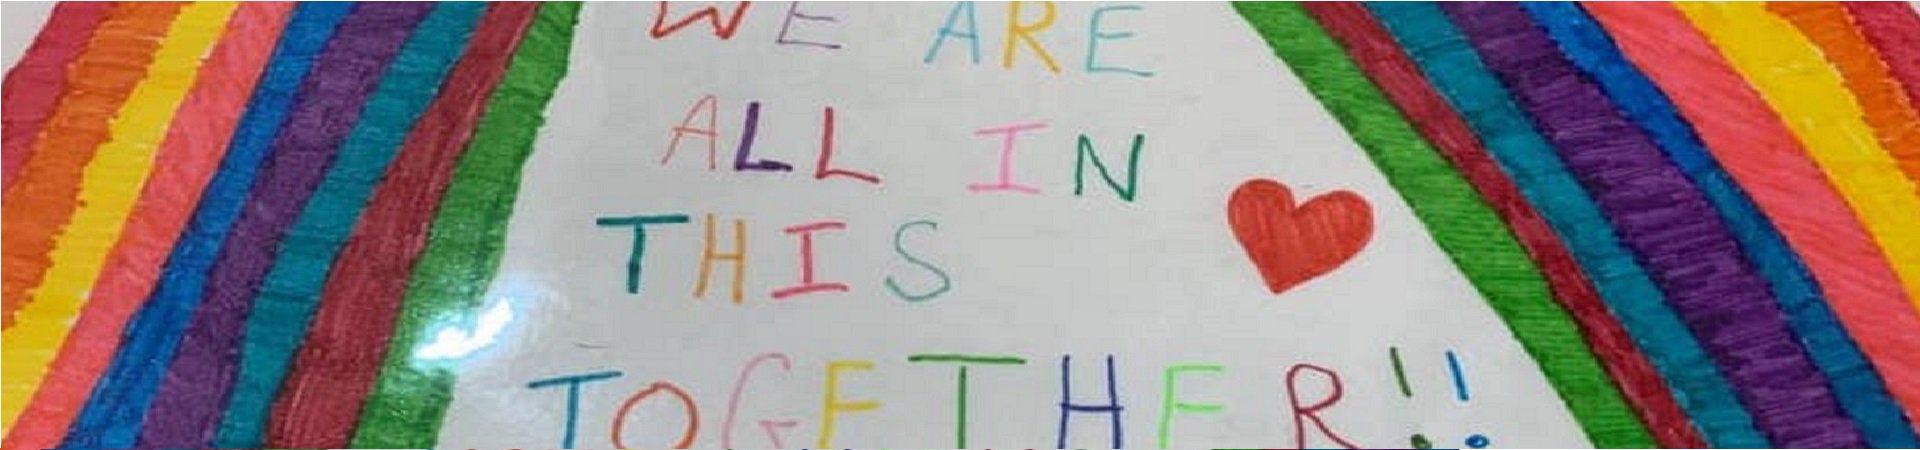 We are all in this together - child's rainbow drawing and words